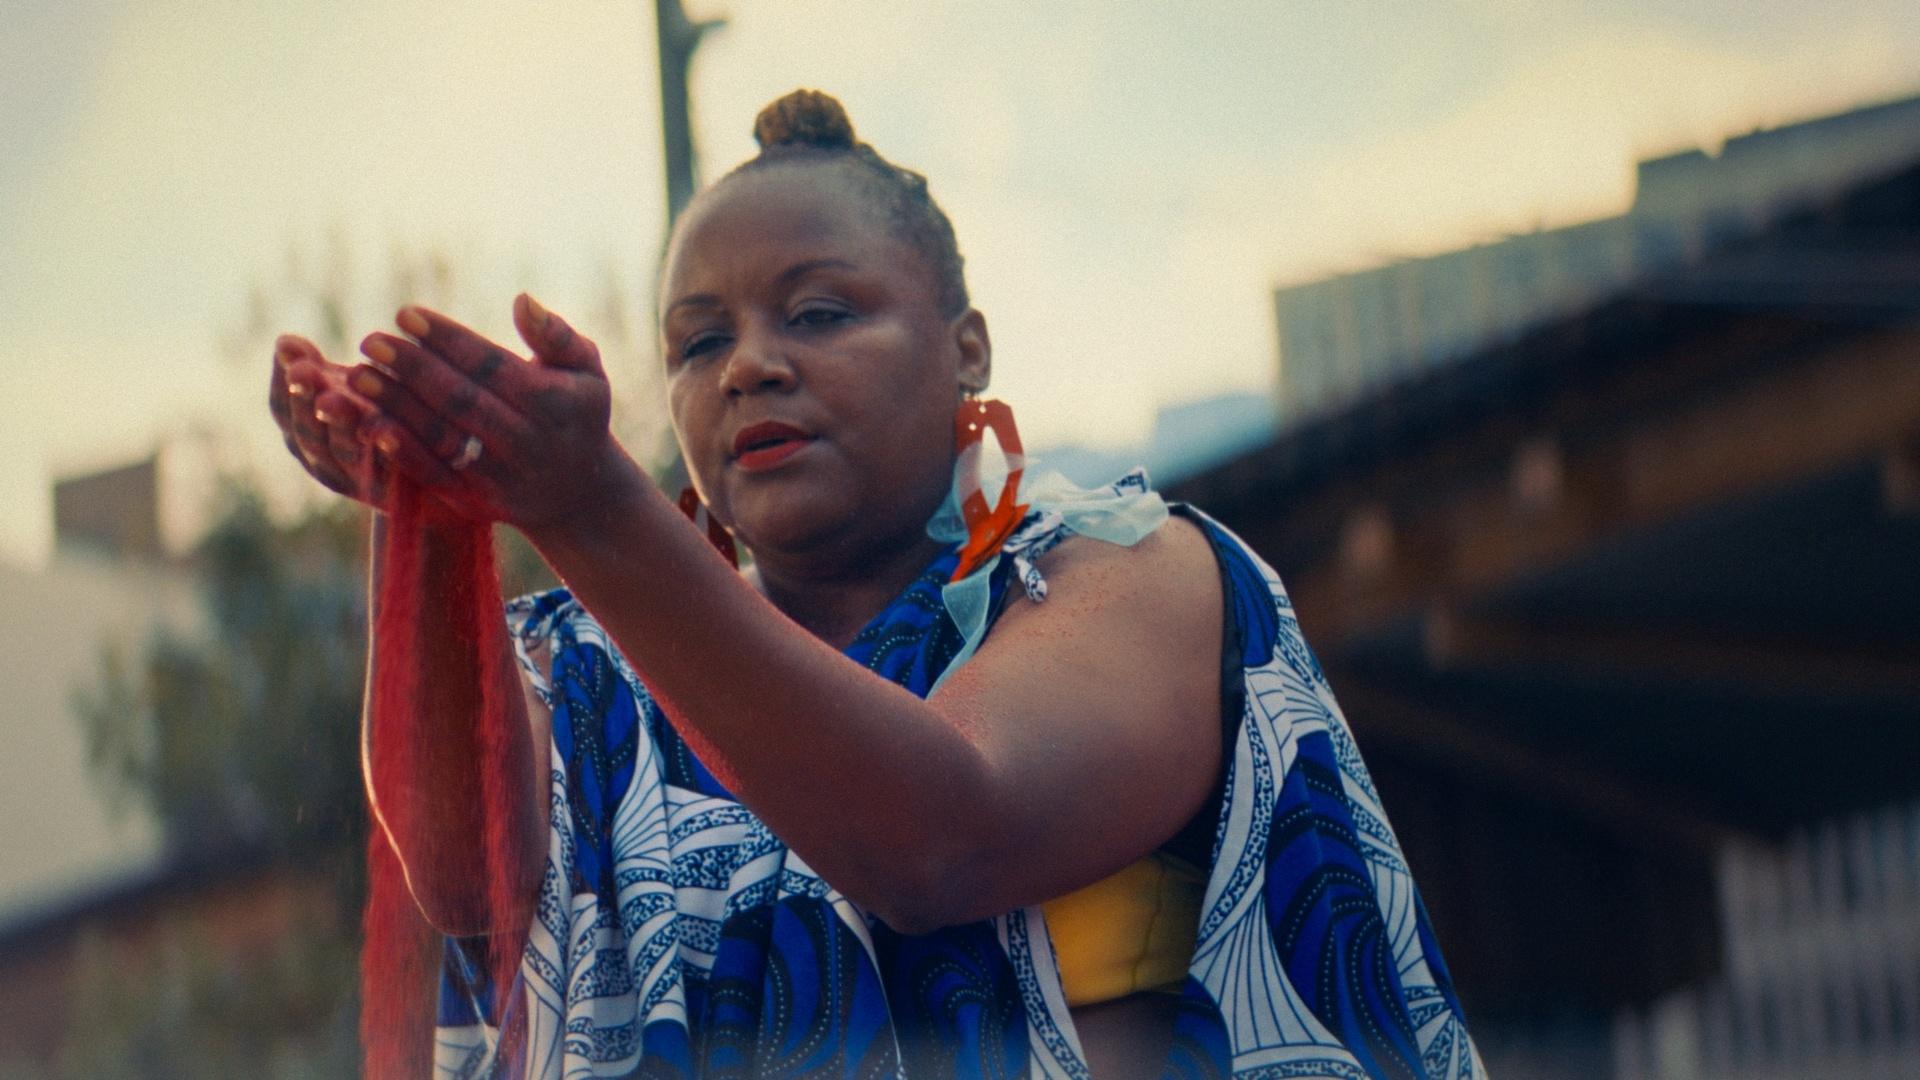 Vershawn Sanders Ward examines red sand as she thinks back to her West African dance roots.